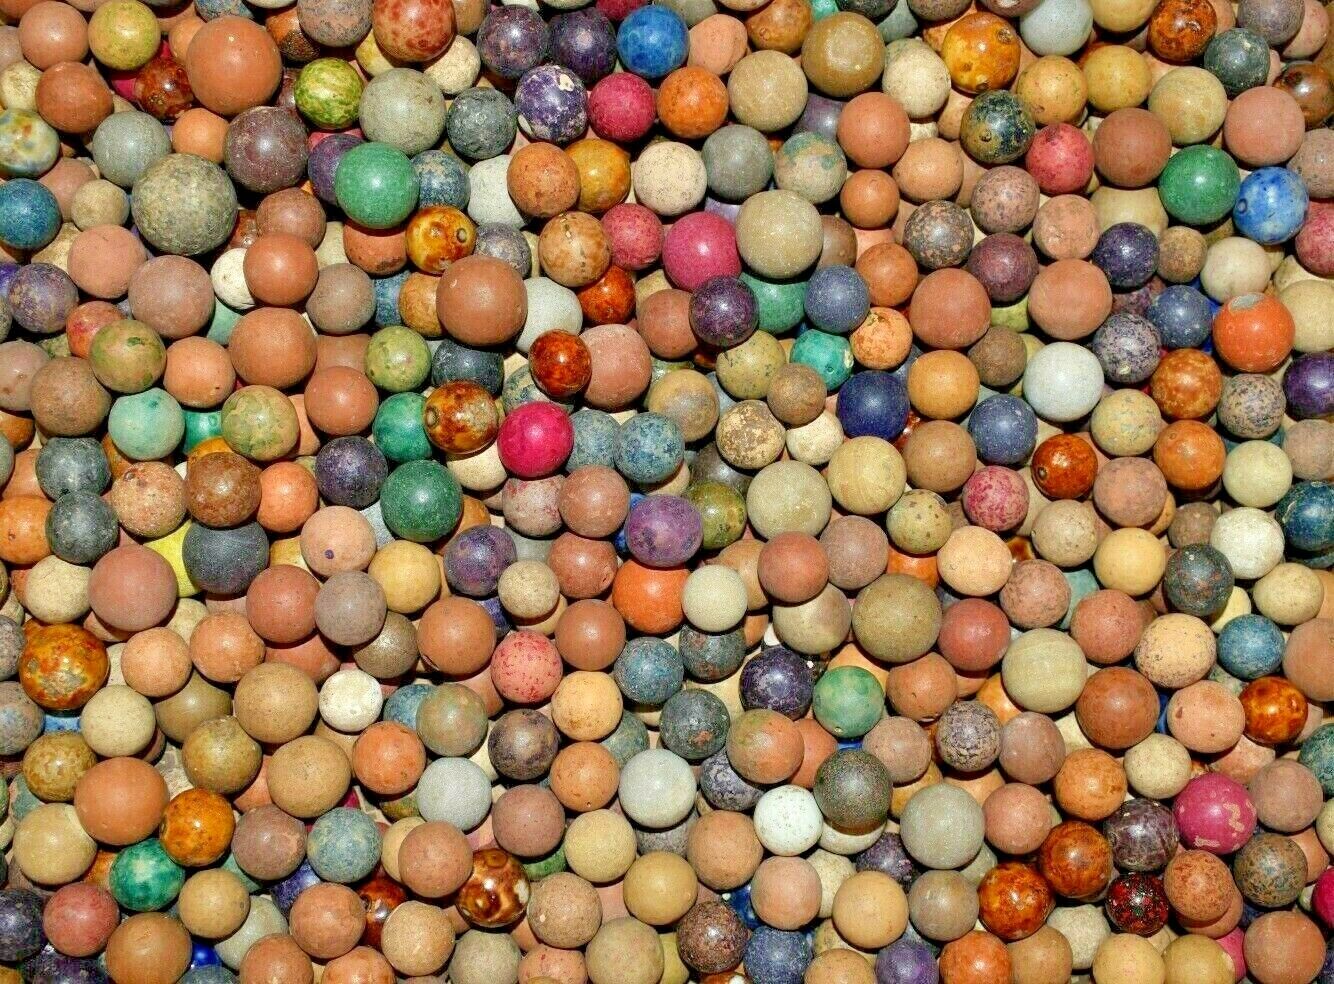 Antique 1800s Civil War era Clay Marbles Lot of 6 Size .500=1/2" + or - Mint! Commies